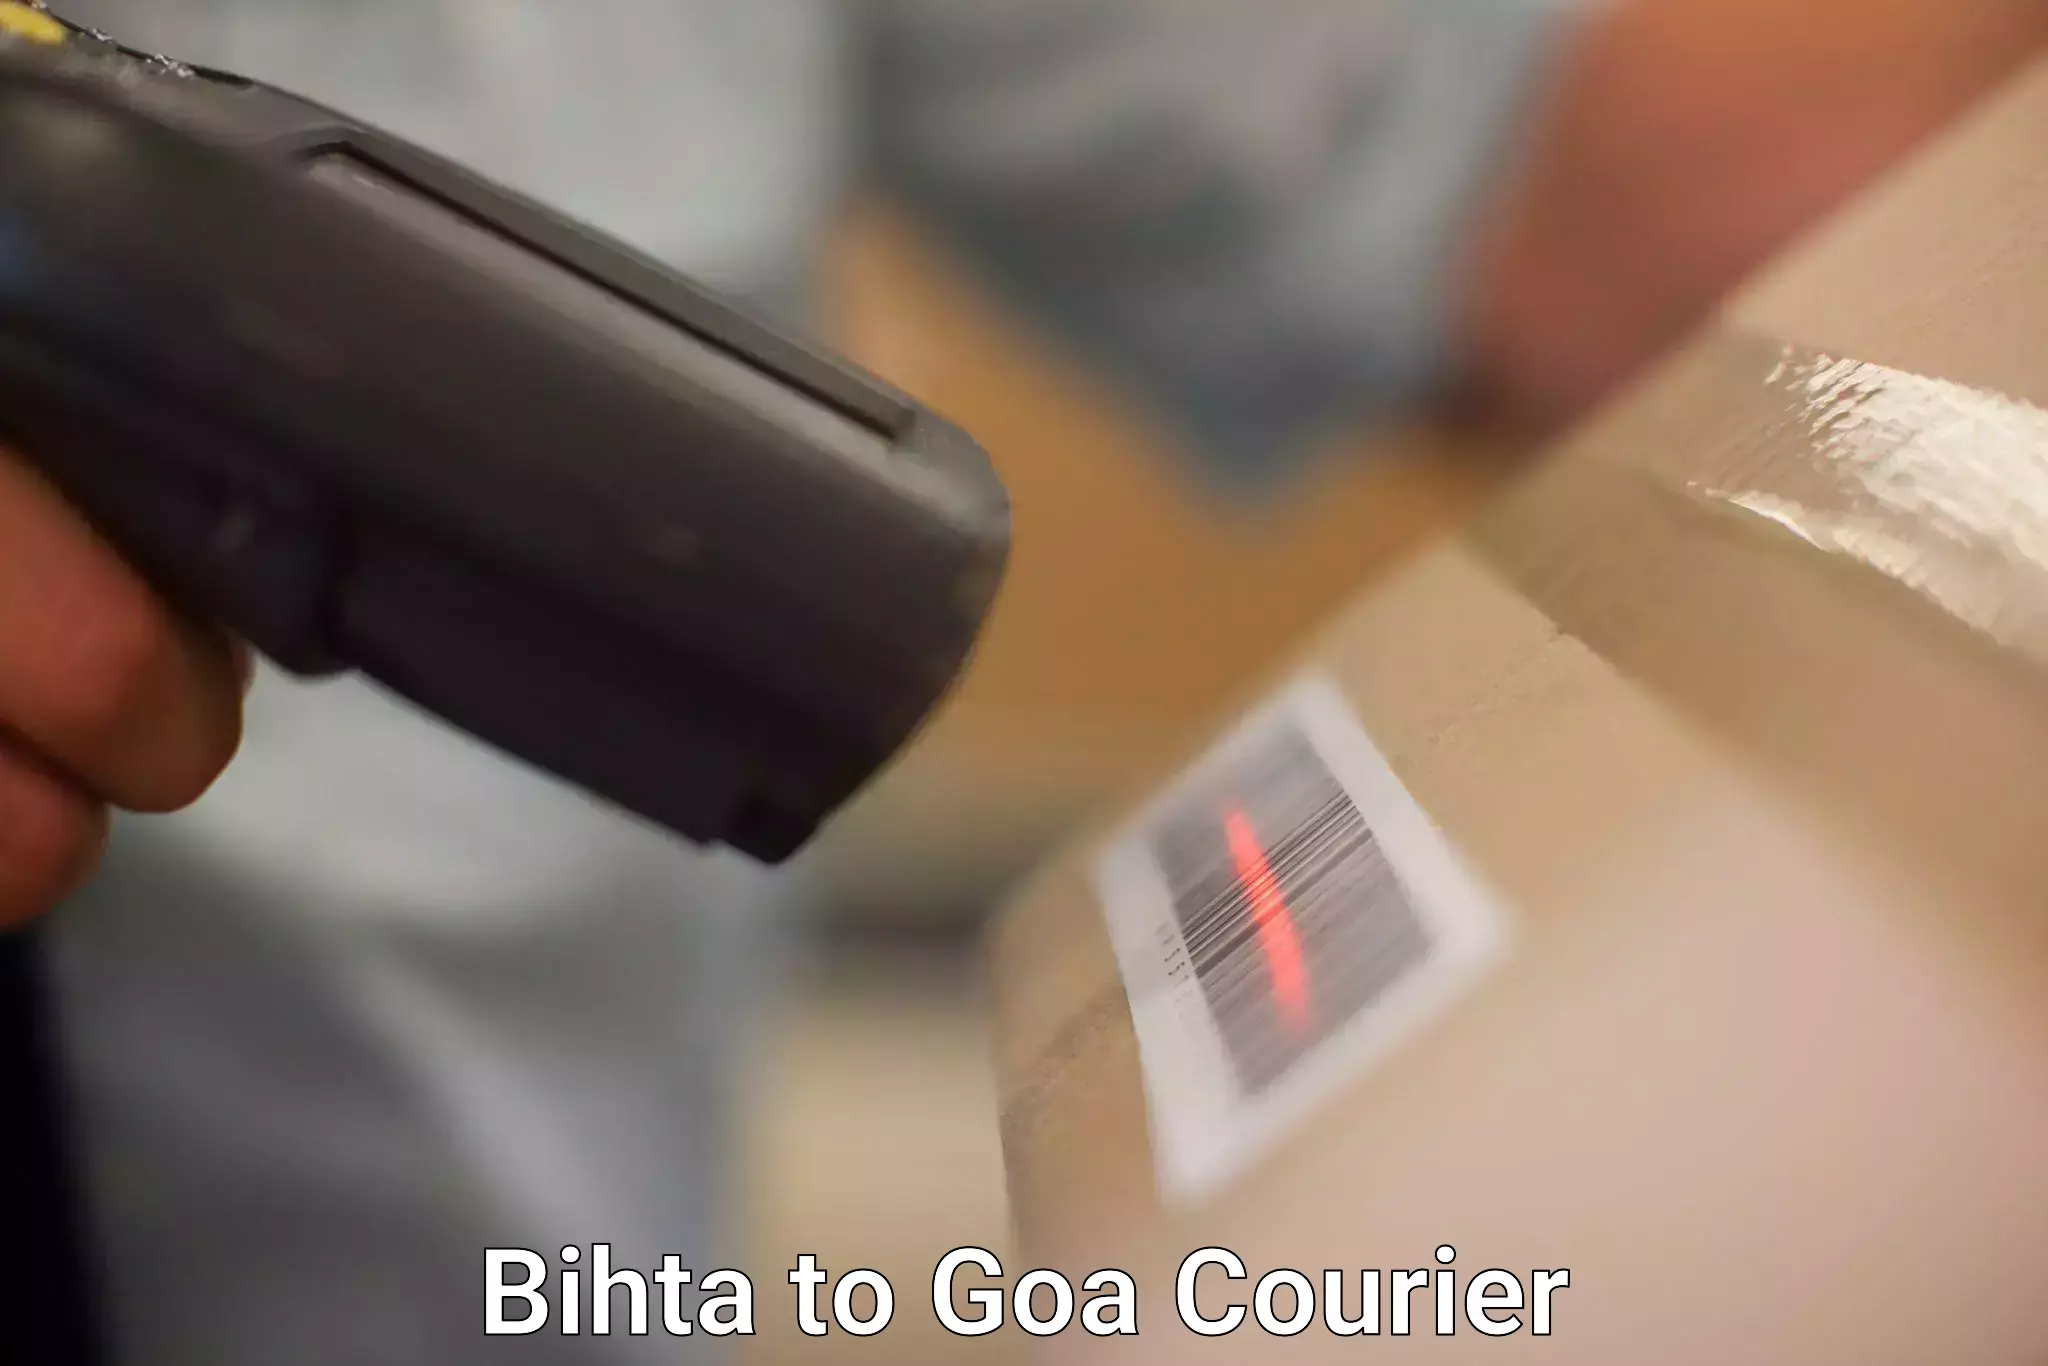 Quality courier services in Bihta to Panjim